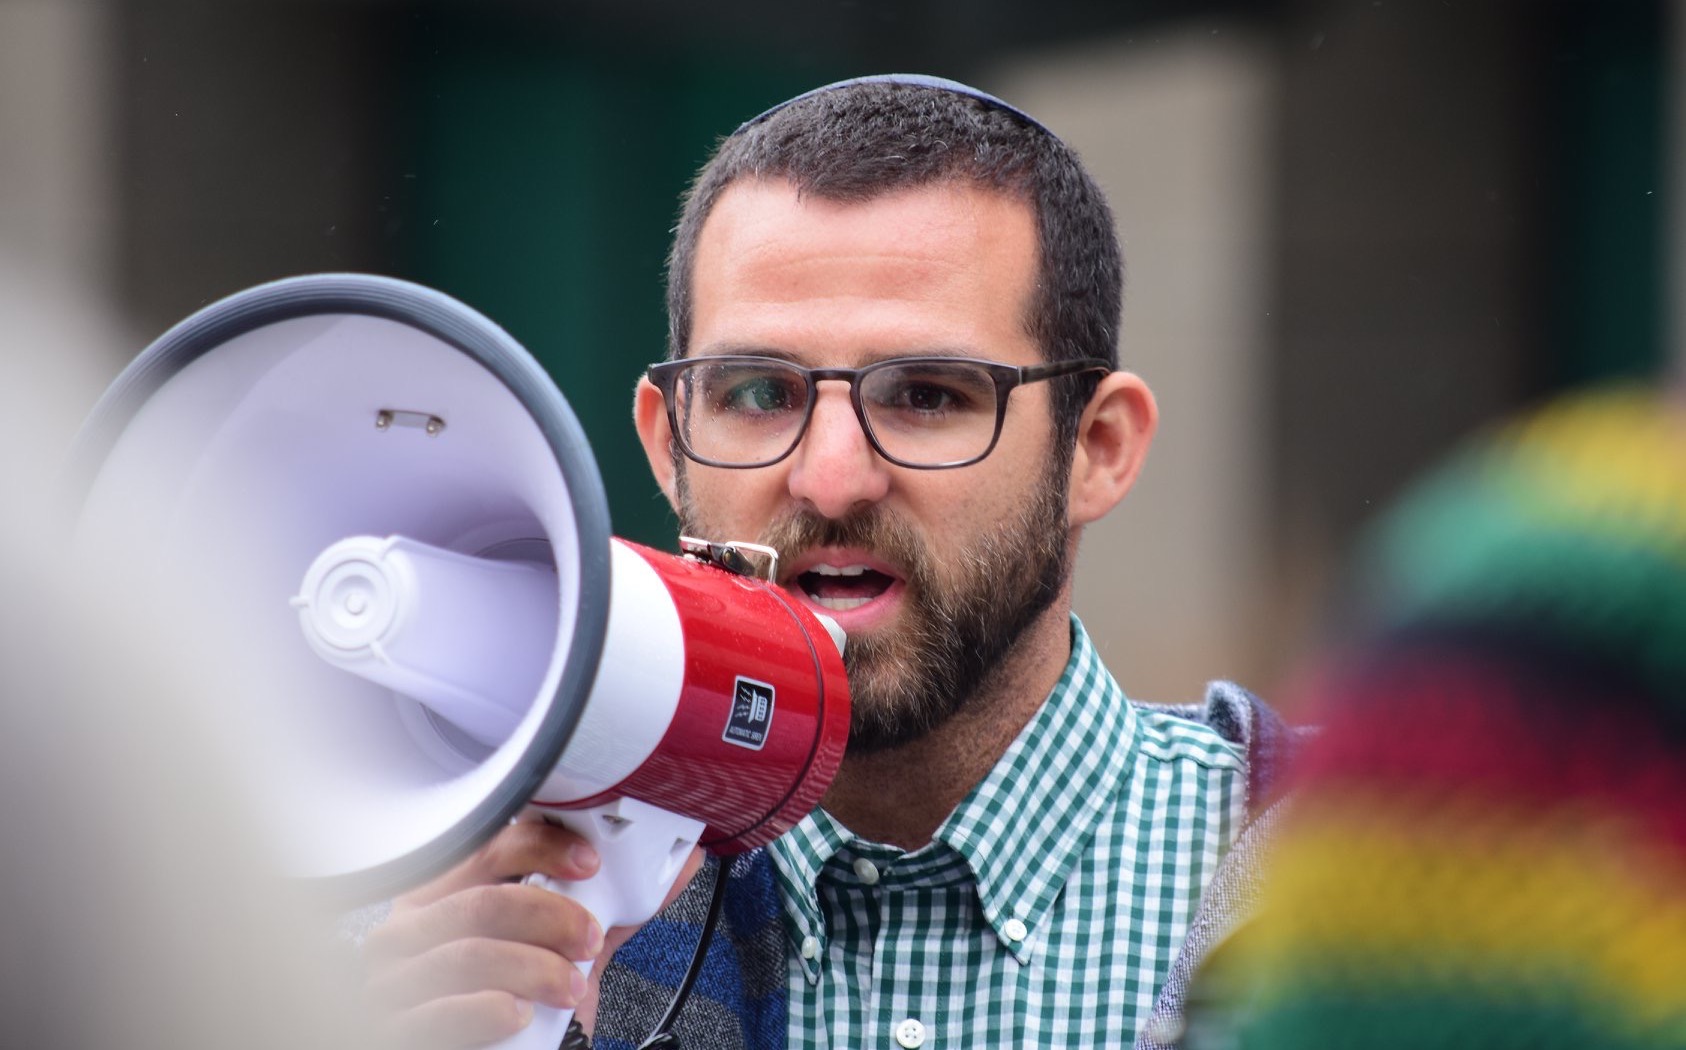 How a Seattle rabbi campaigned to protect undocumented immigrants in his community